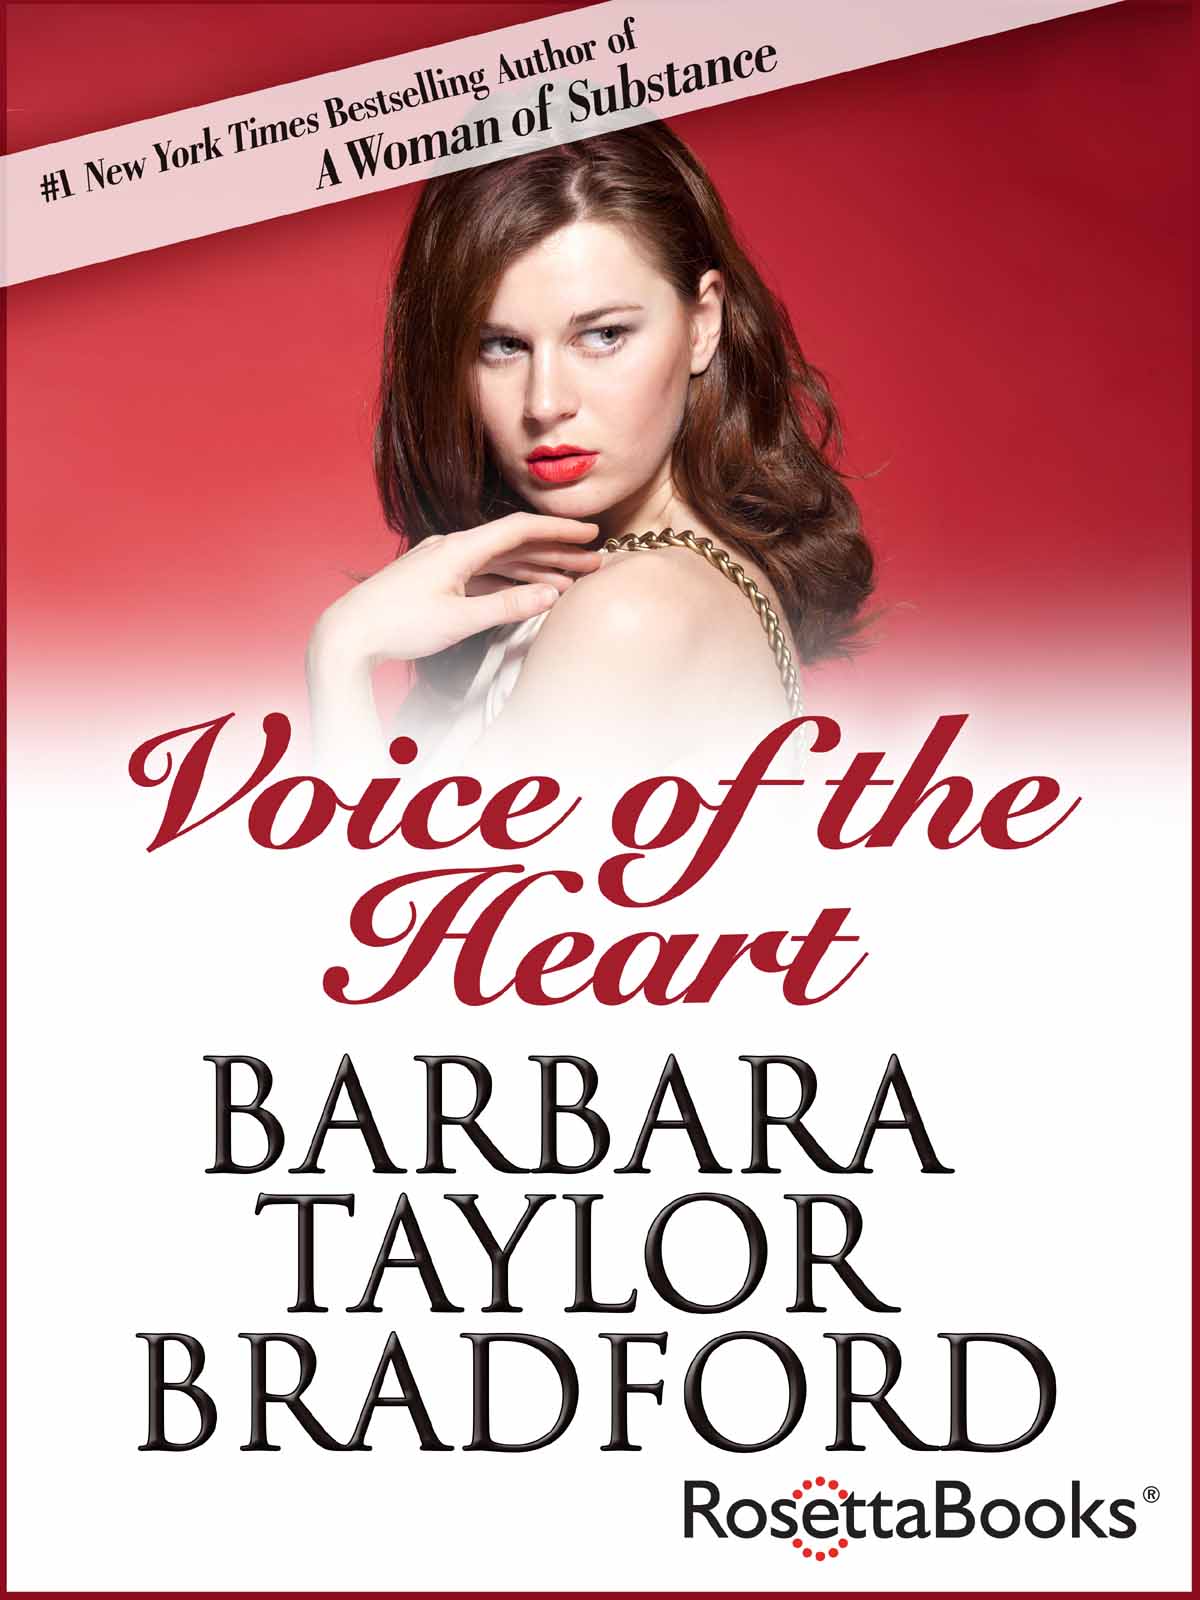 Voice of the Heart (2014) by Barbara Taylor Bradford